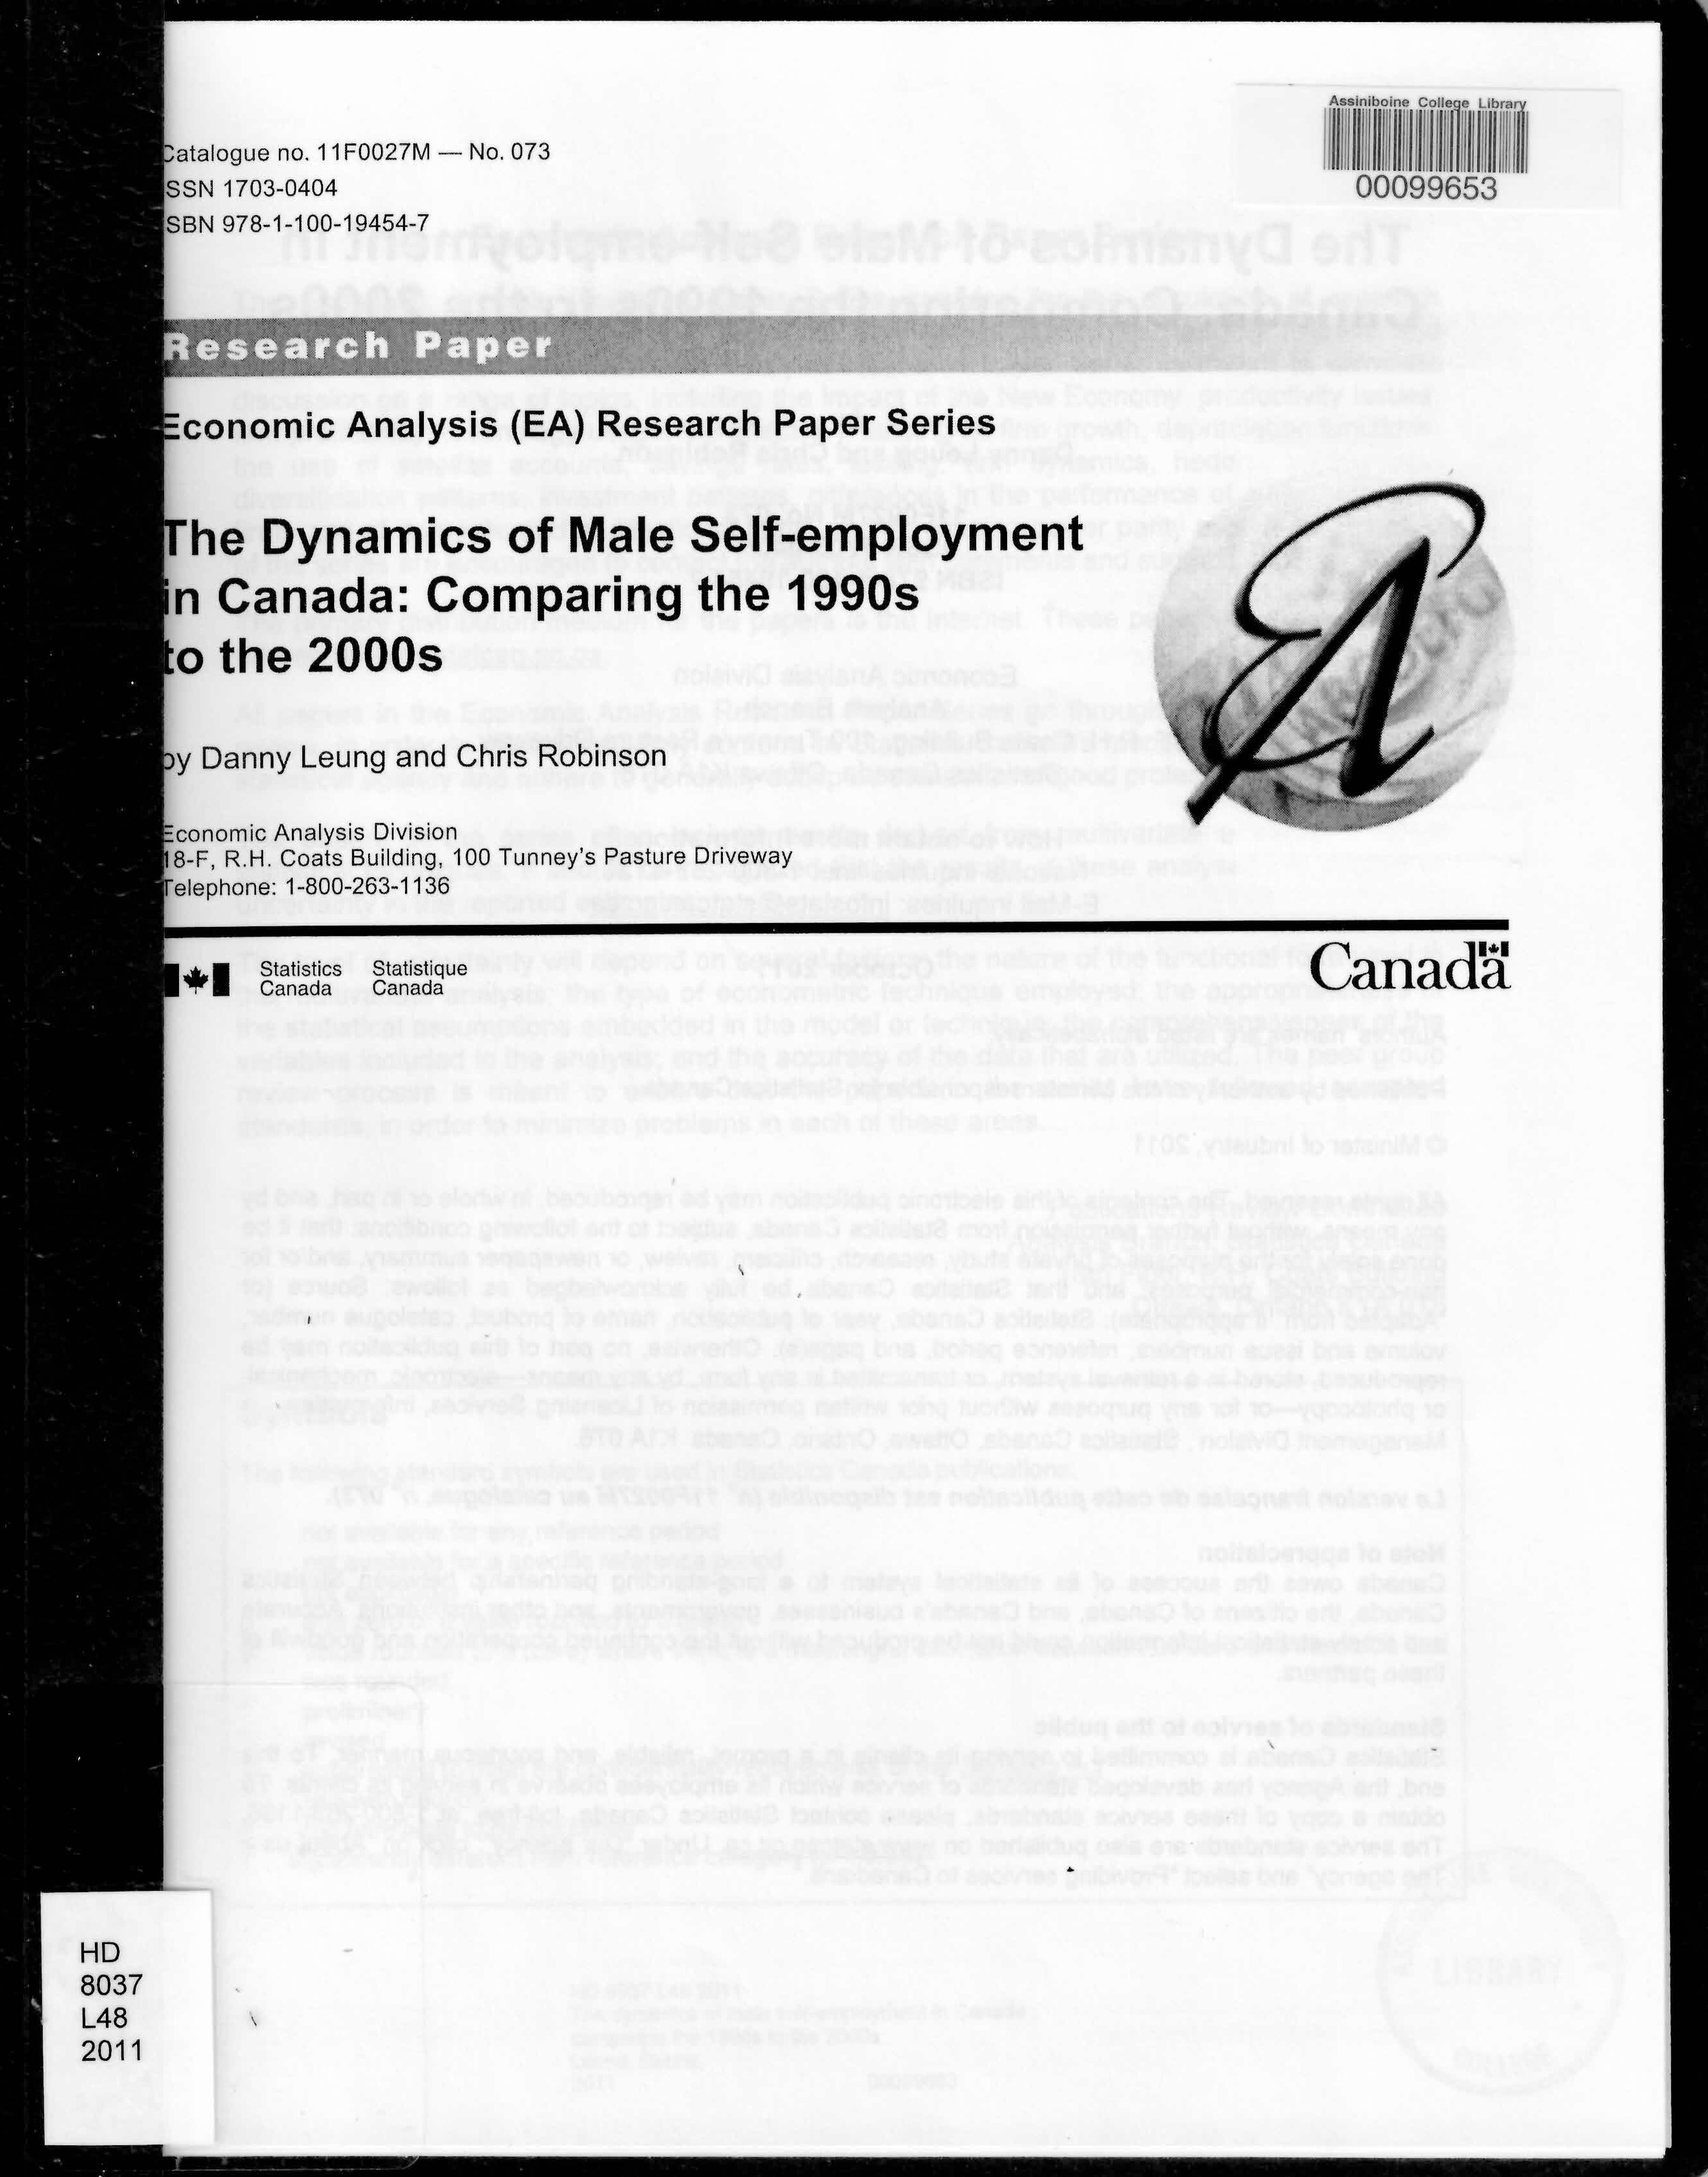 The dynamics of male self-employment in Canada : comparing the 1990s to the 2000s